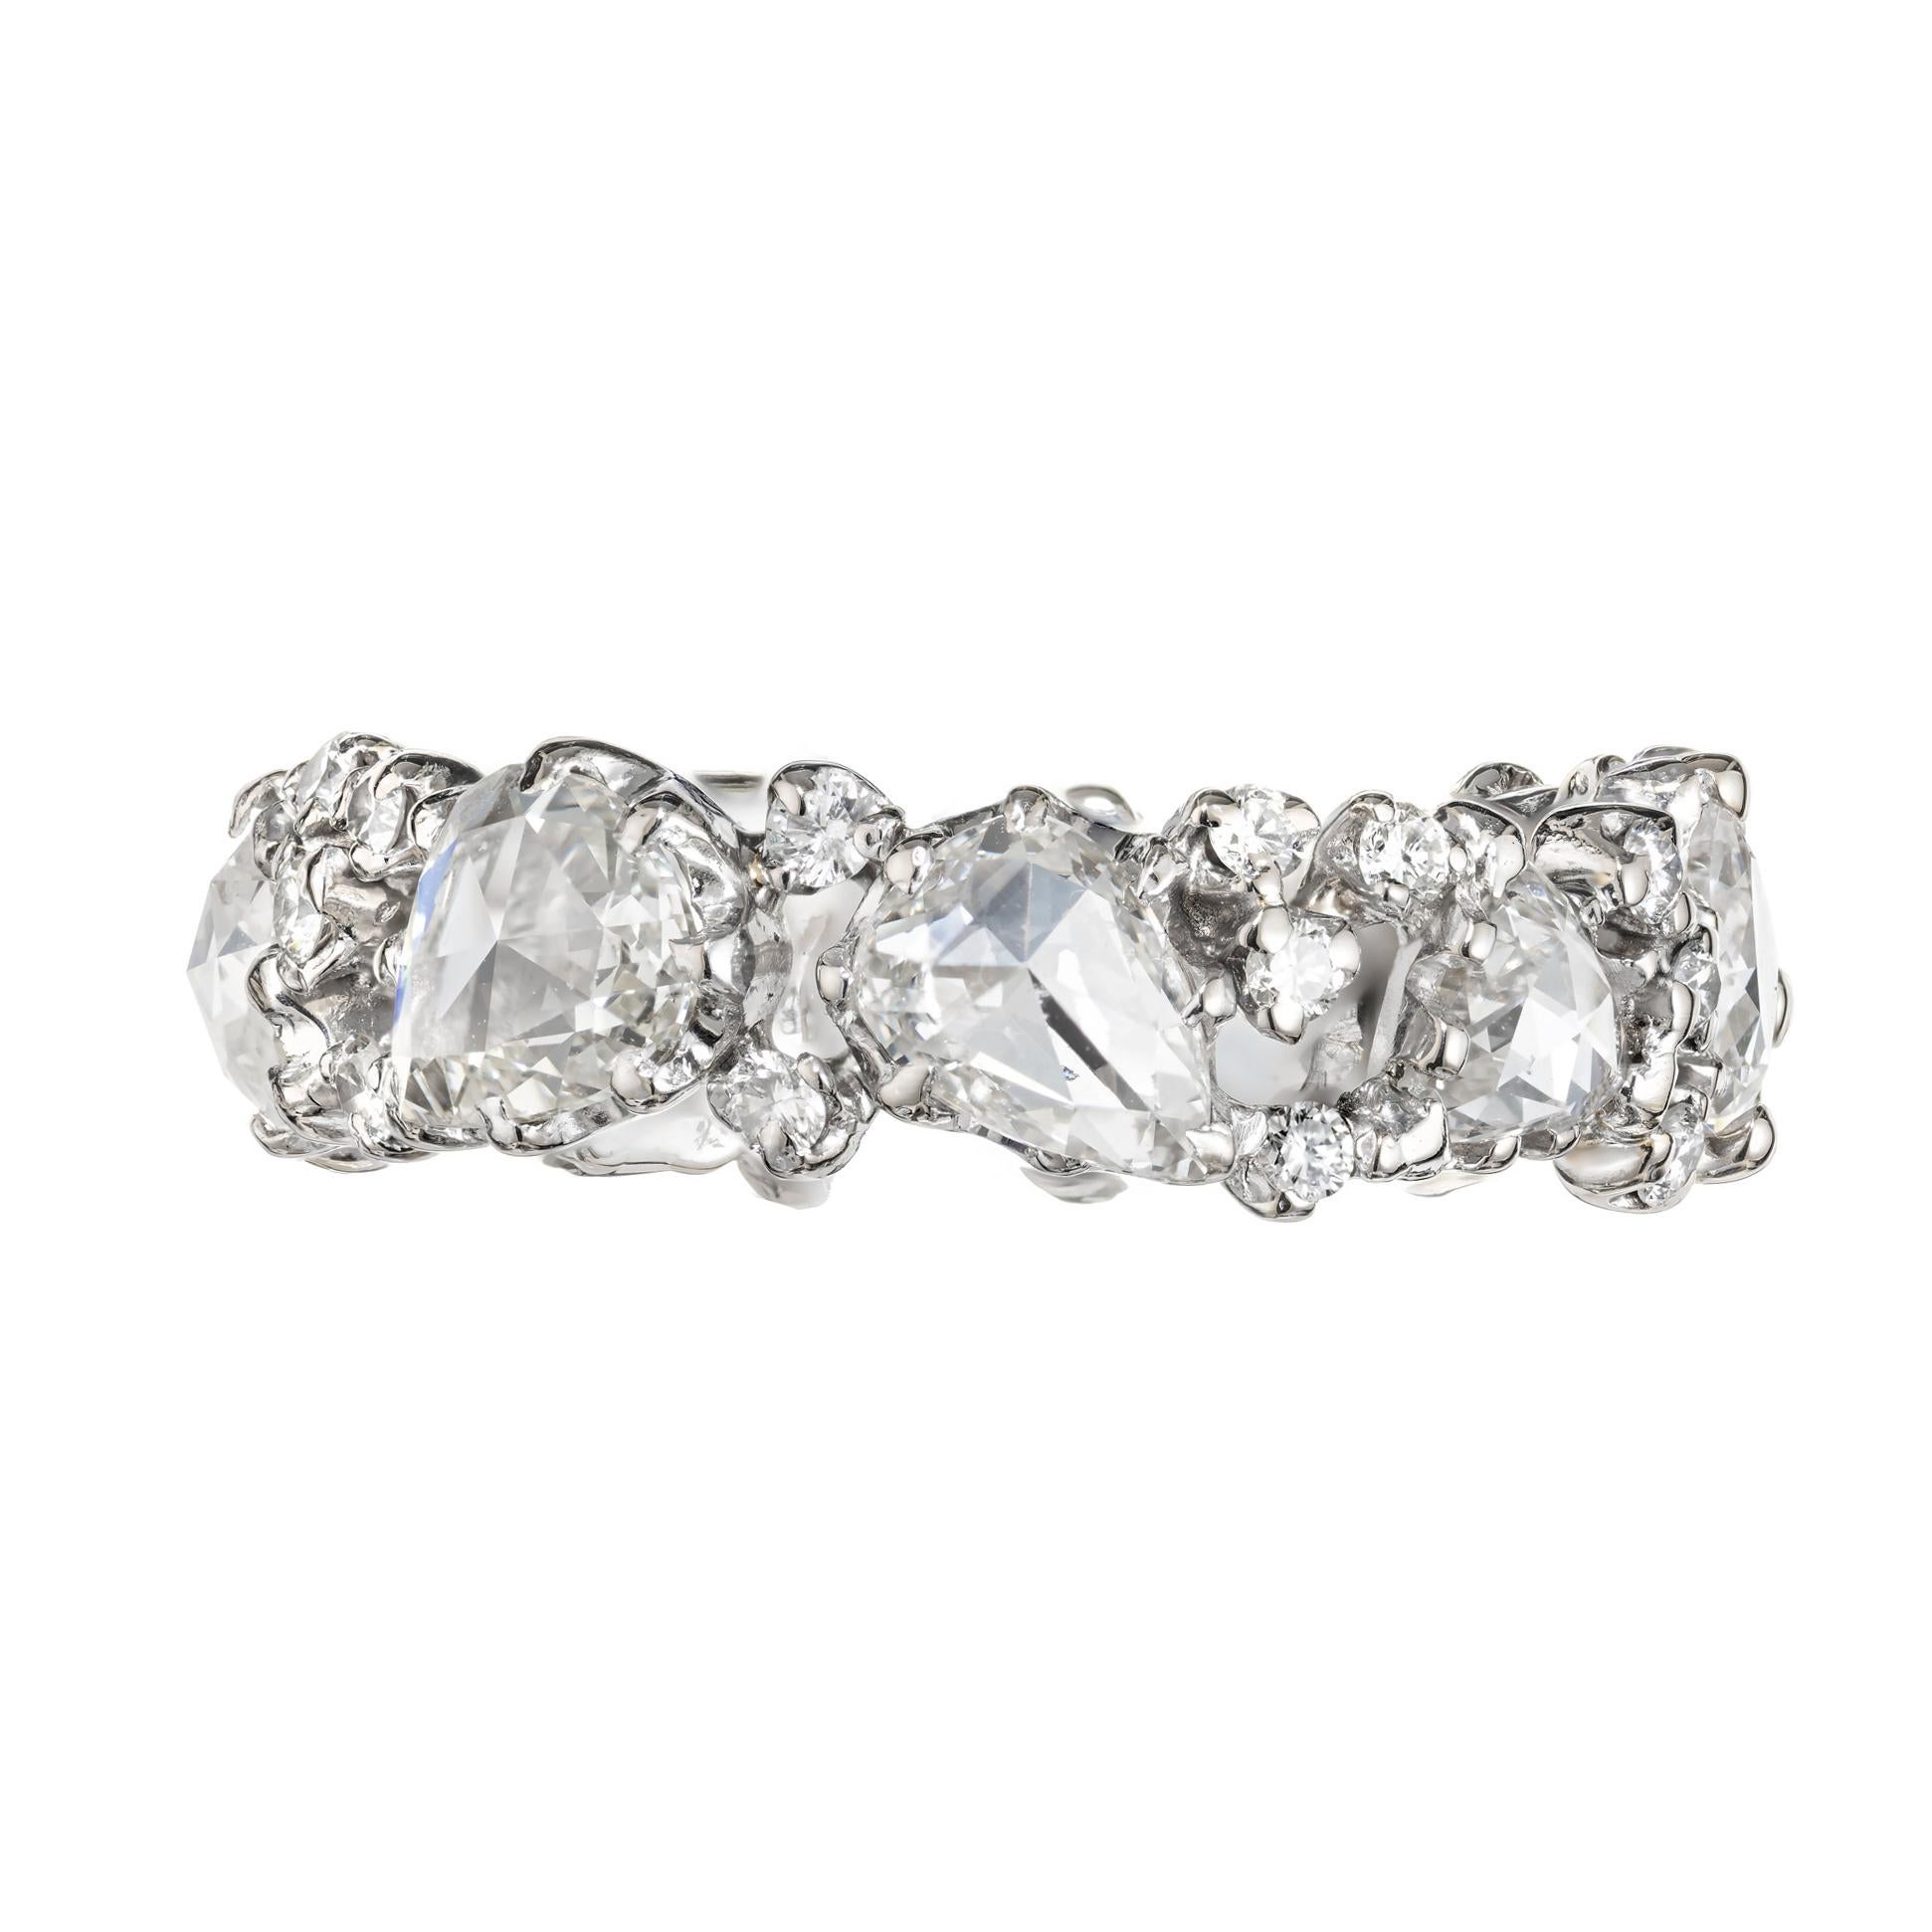 Beautiful Fred Leighton diamond wedding band ring. 10 rose cut diamonds accented with 27 full cut diamonds set in this unique 18k white gold eternity wedding band. 

10 rose cut diamonds, I VS approx. 2.50cts
27 full cut diamonds, approx.